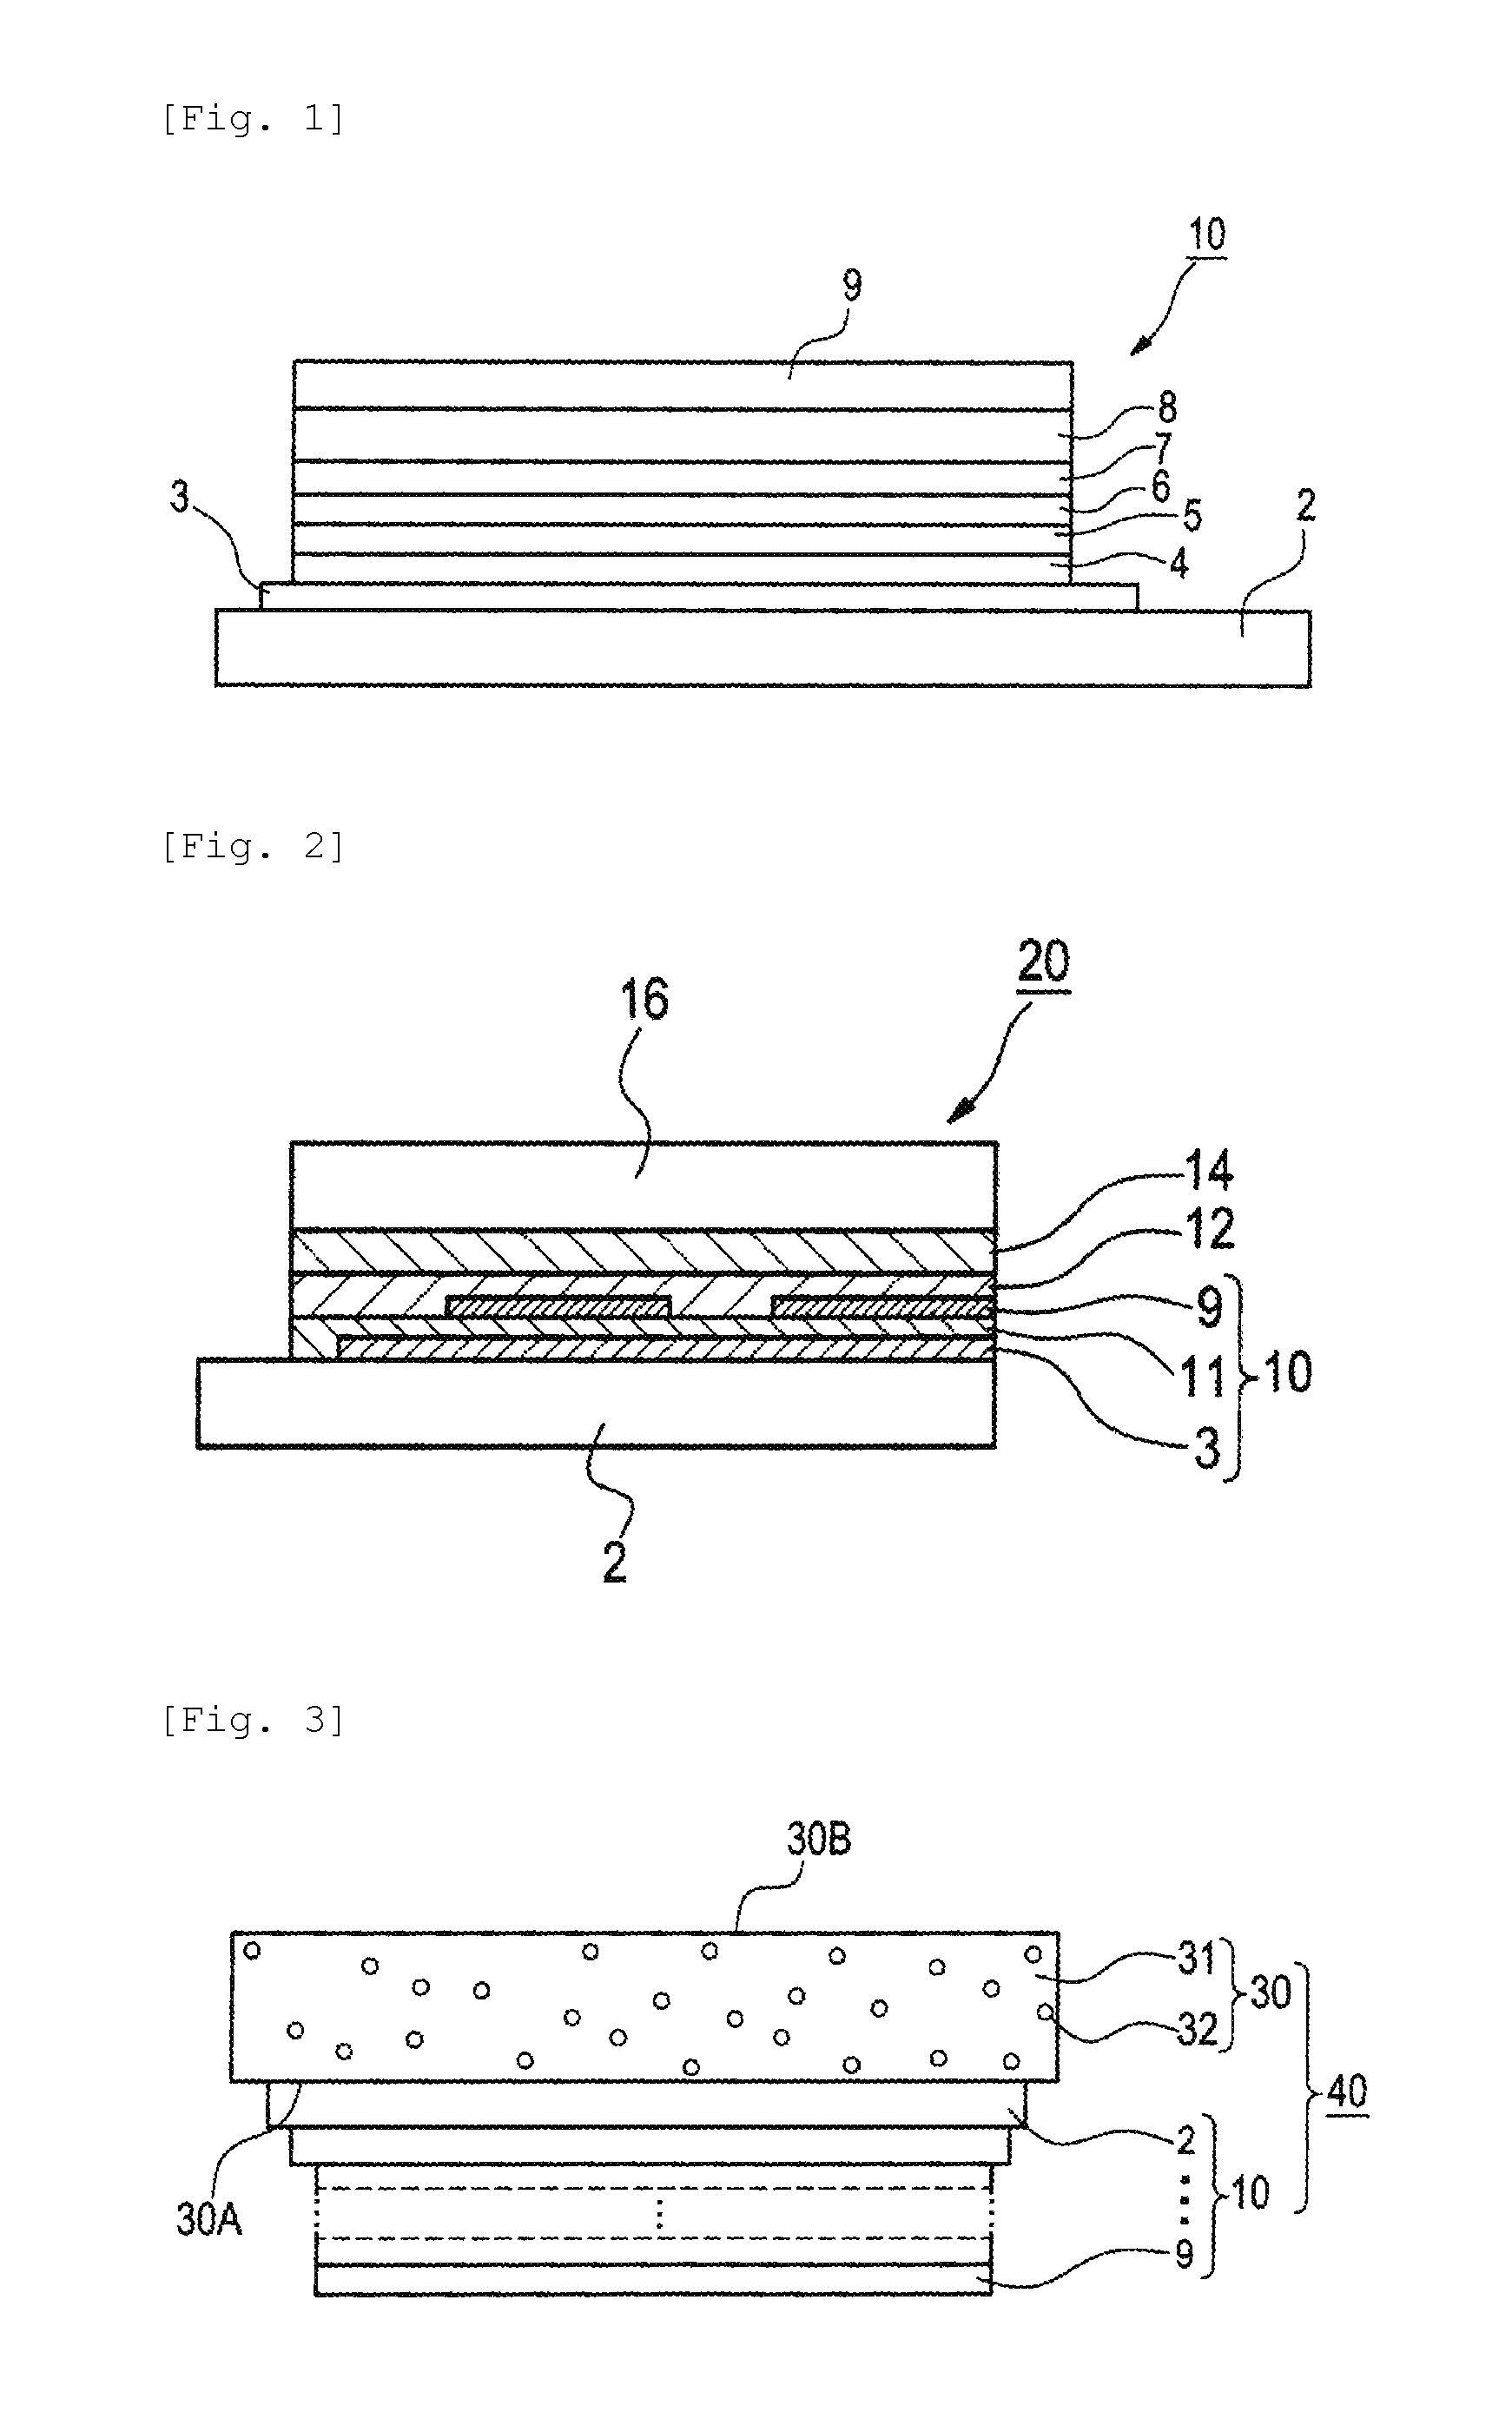 Organic electroluminescent element, compounds and materials used for the organic electroluminescent element, and light-emitting, display and illuminating devices using the elements